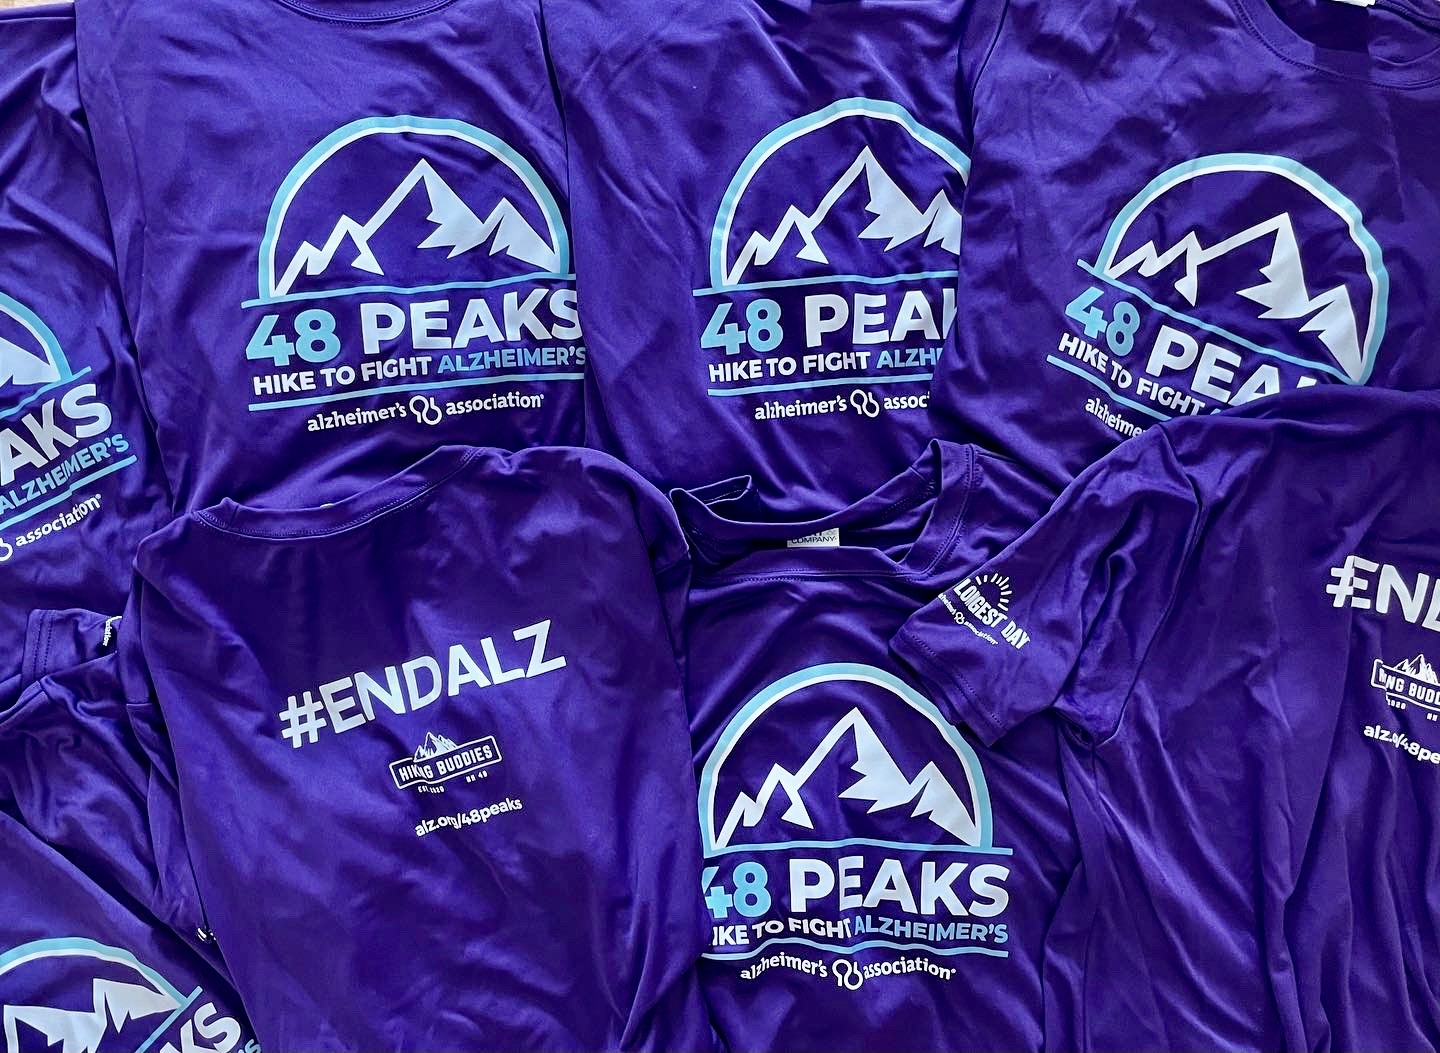 Eastern Mountain Sports Corporate Team For Alzheimer’s Association 48 Peaks Event